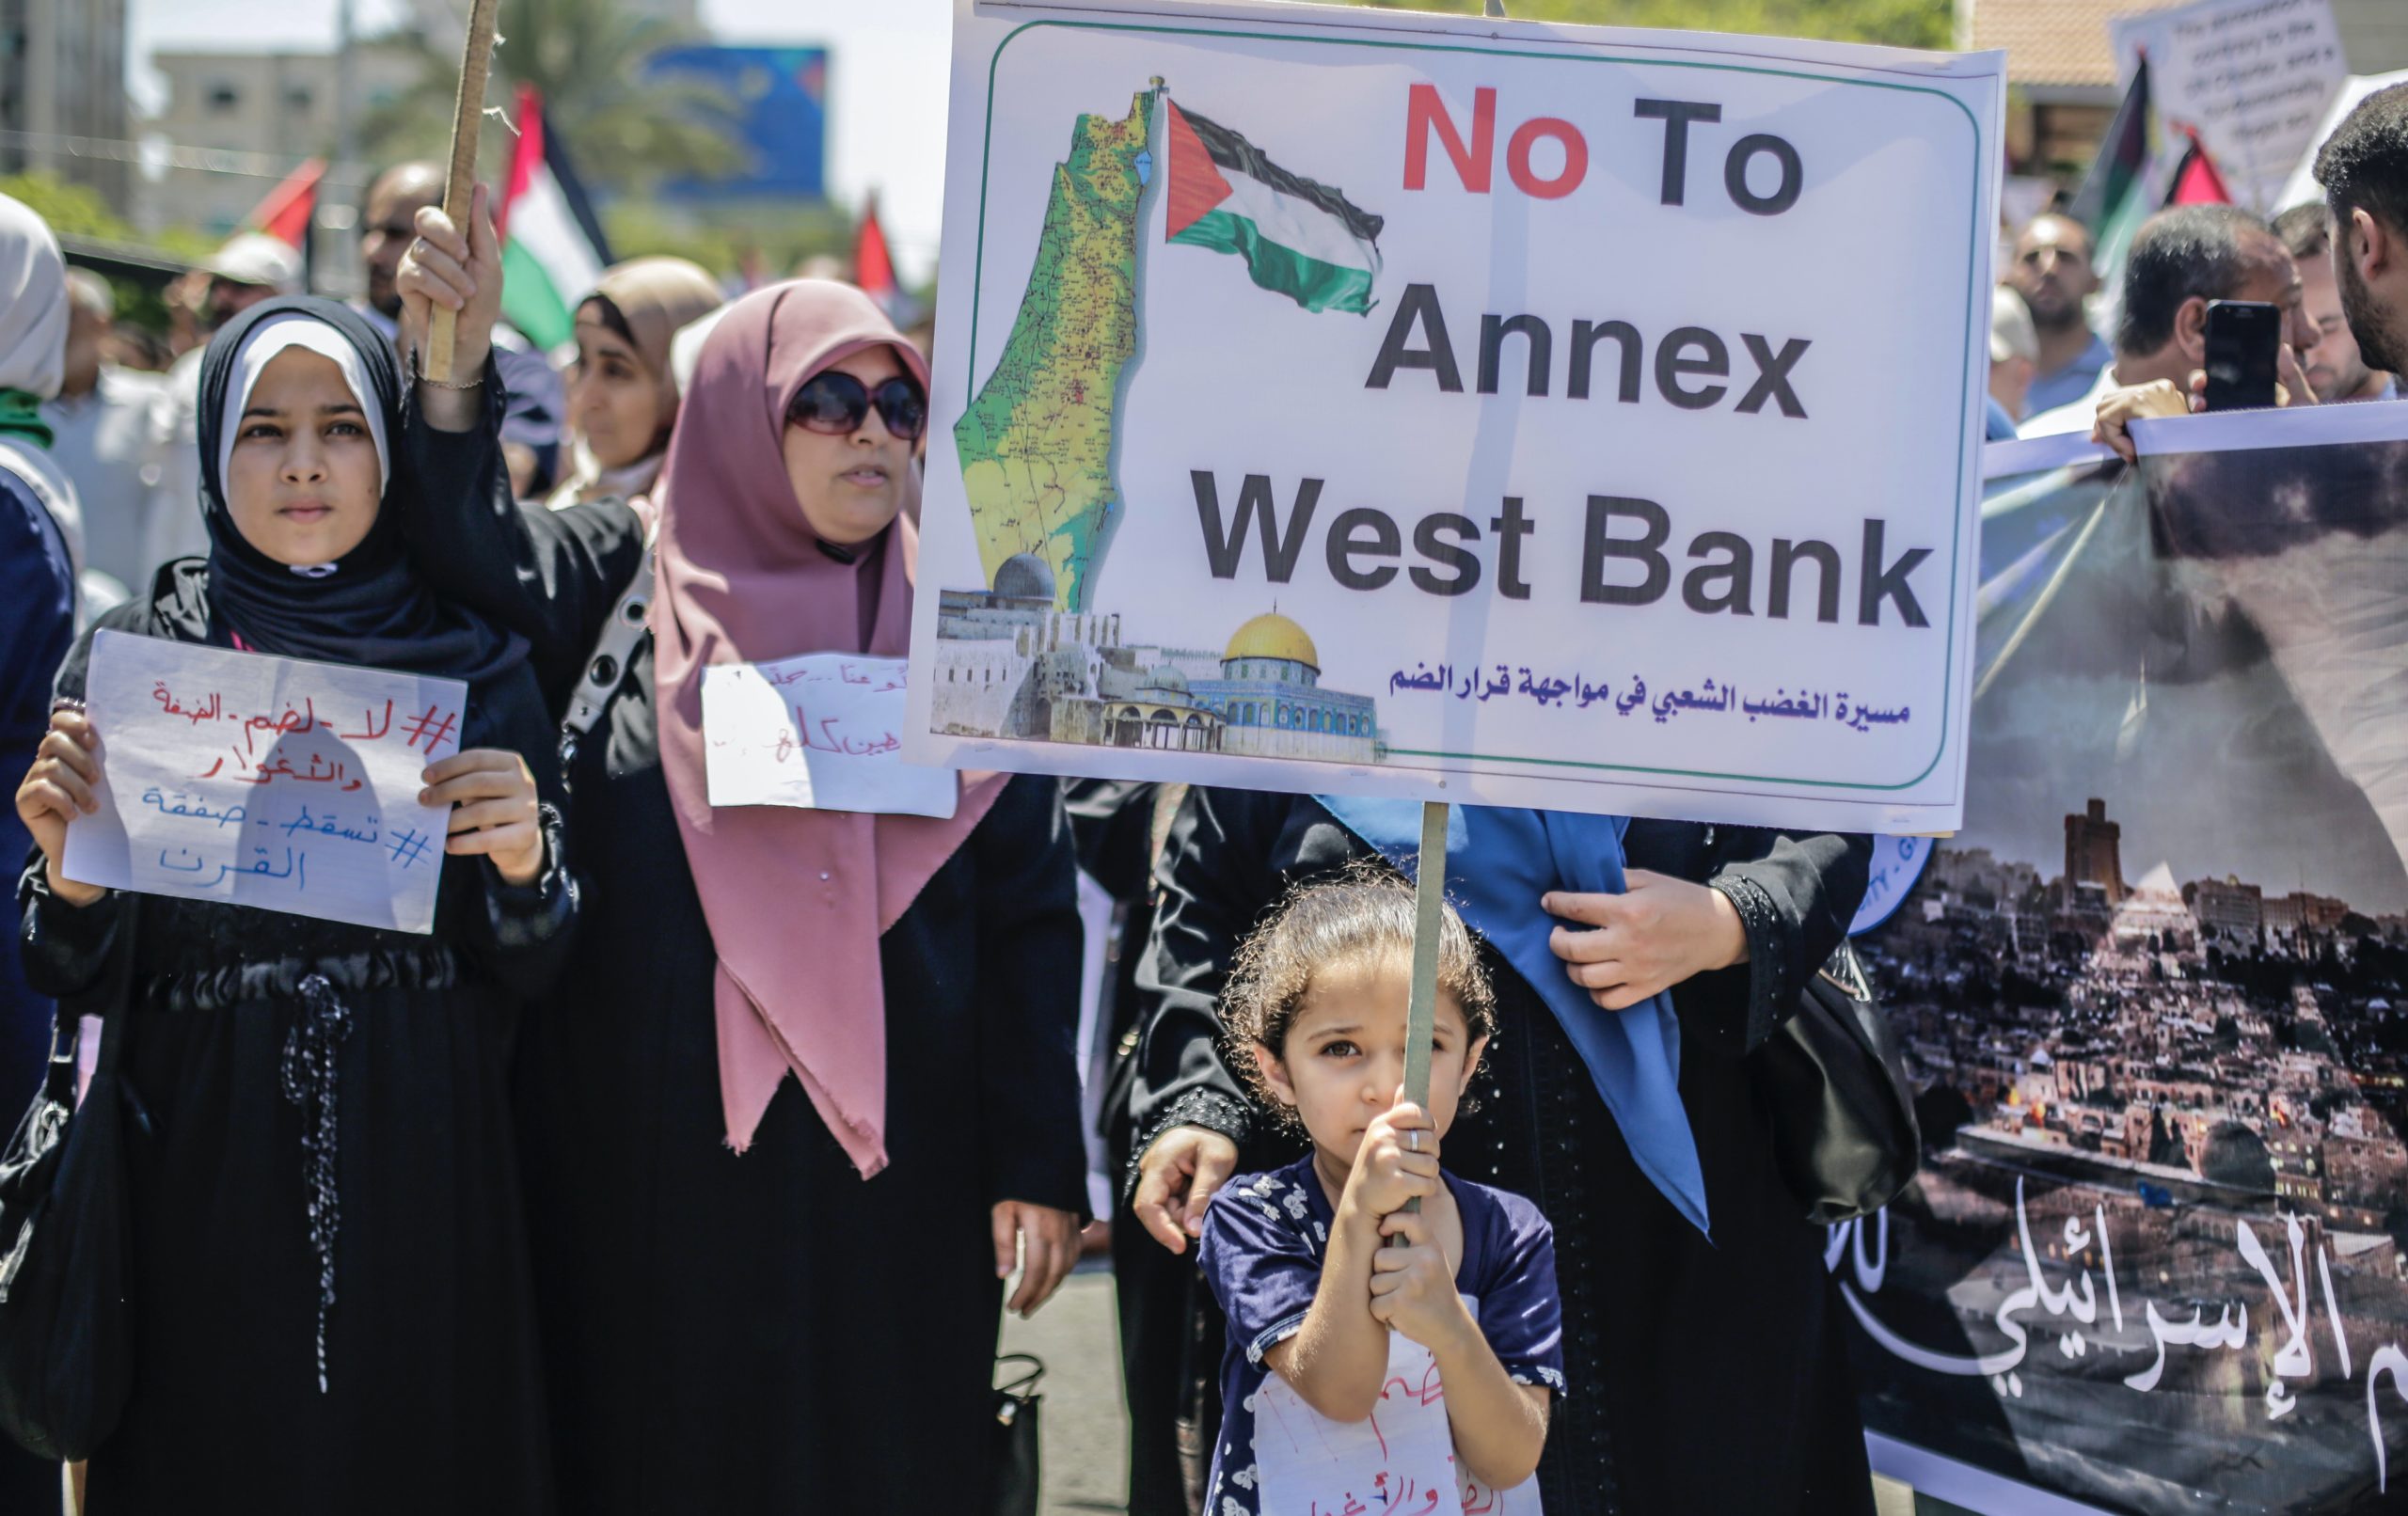 Protest against annexation of the West Bank